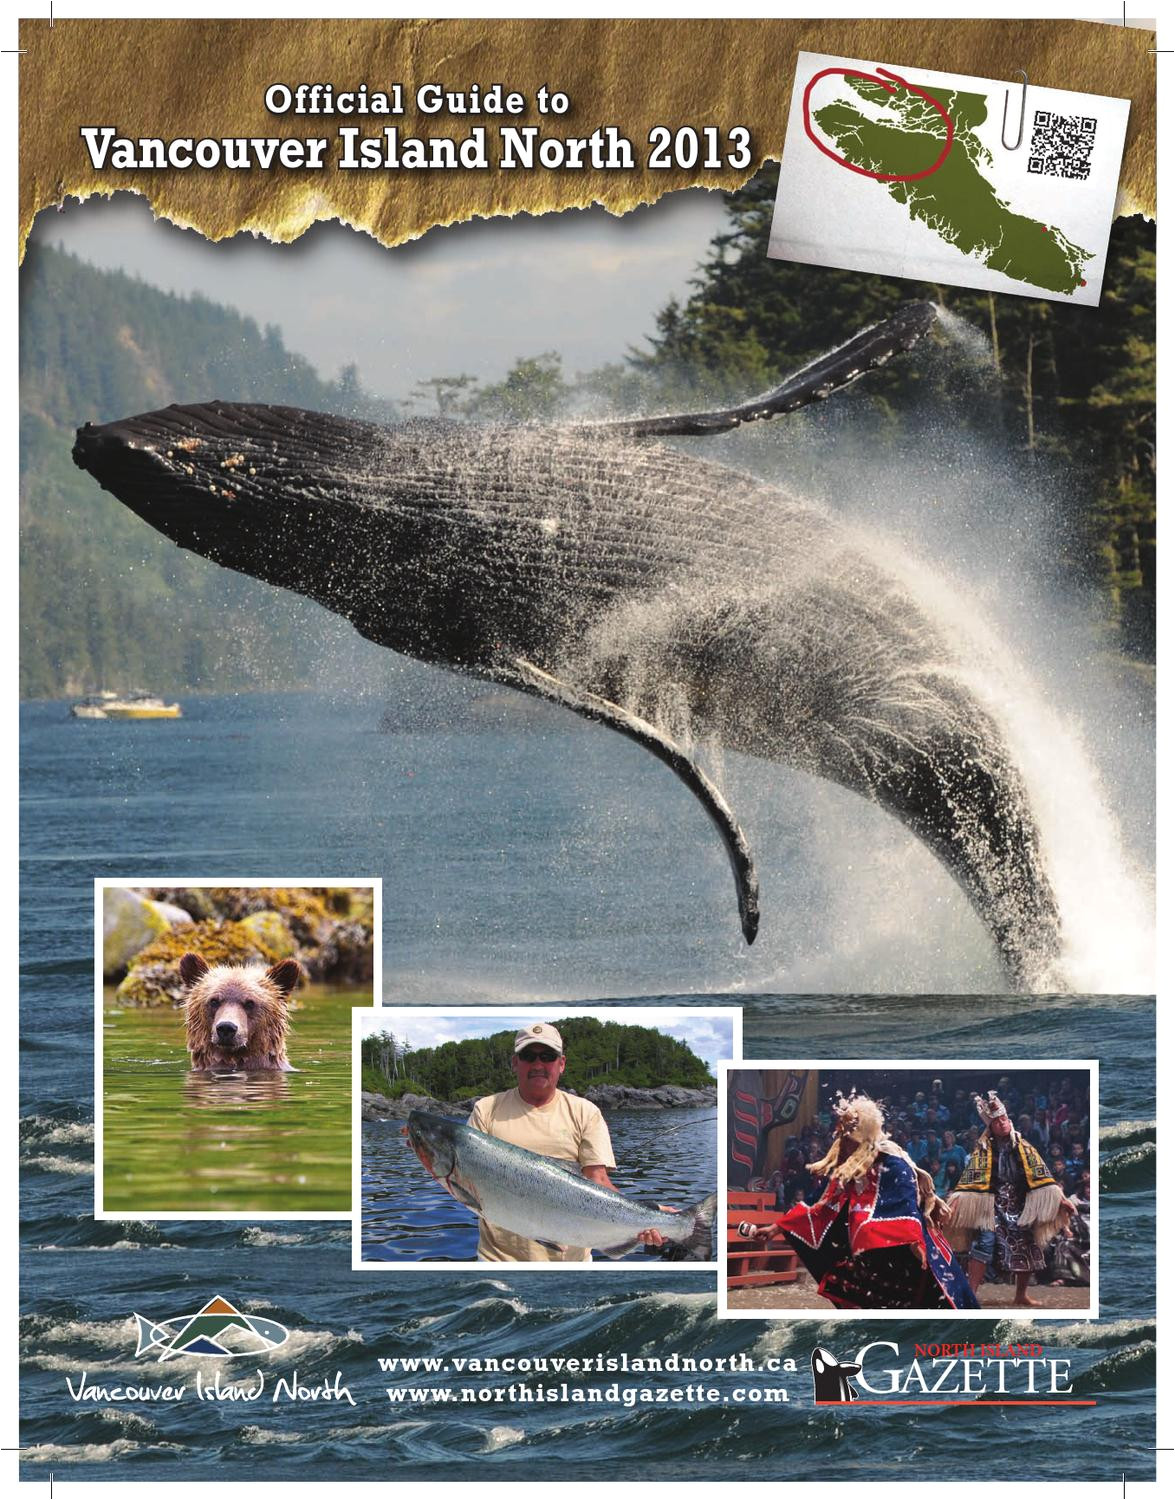 northern vancouver island visitors guide by north island gazette issuu